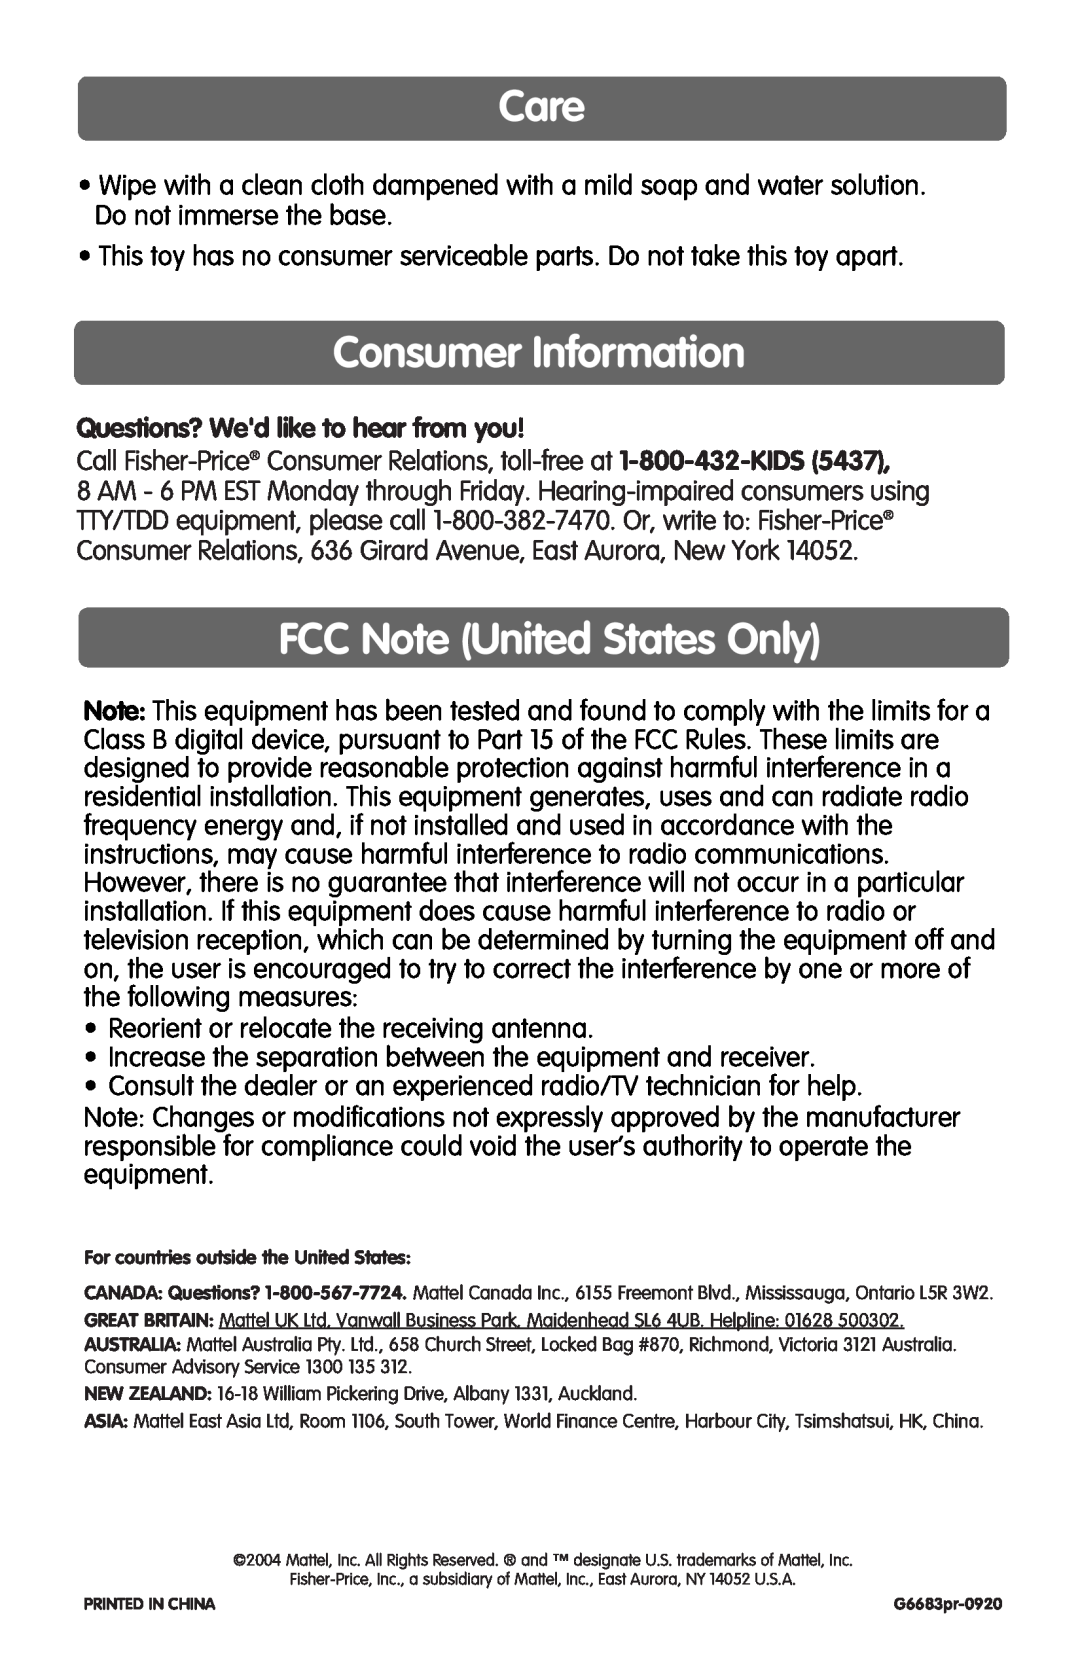 Fisher-Price G8370, G6683 Care, Consumer Information, FCC Note United States Only, Questions? Wed like to hear from you 